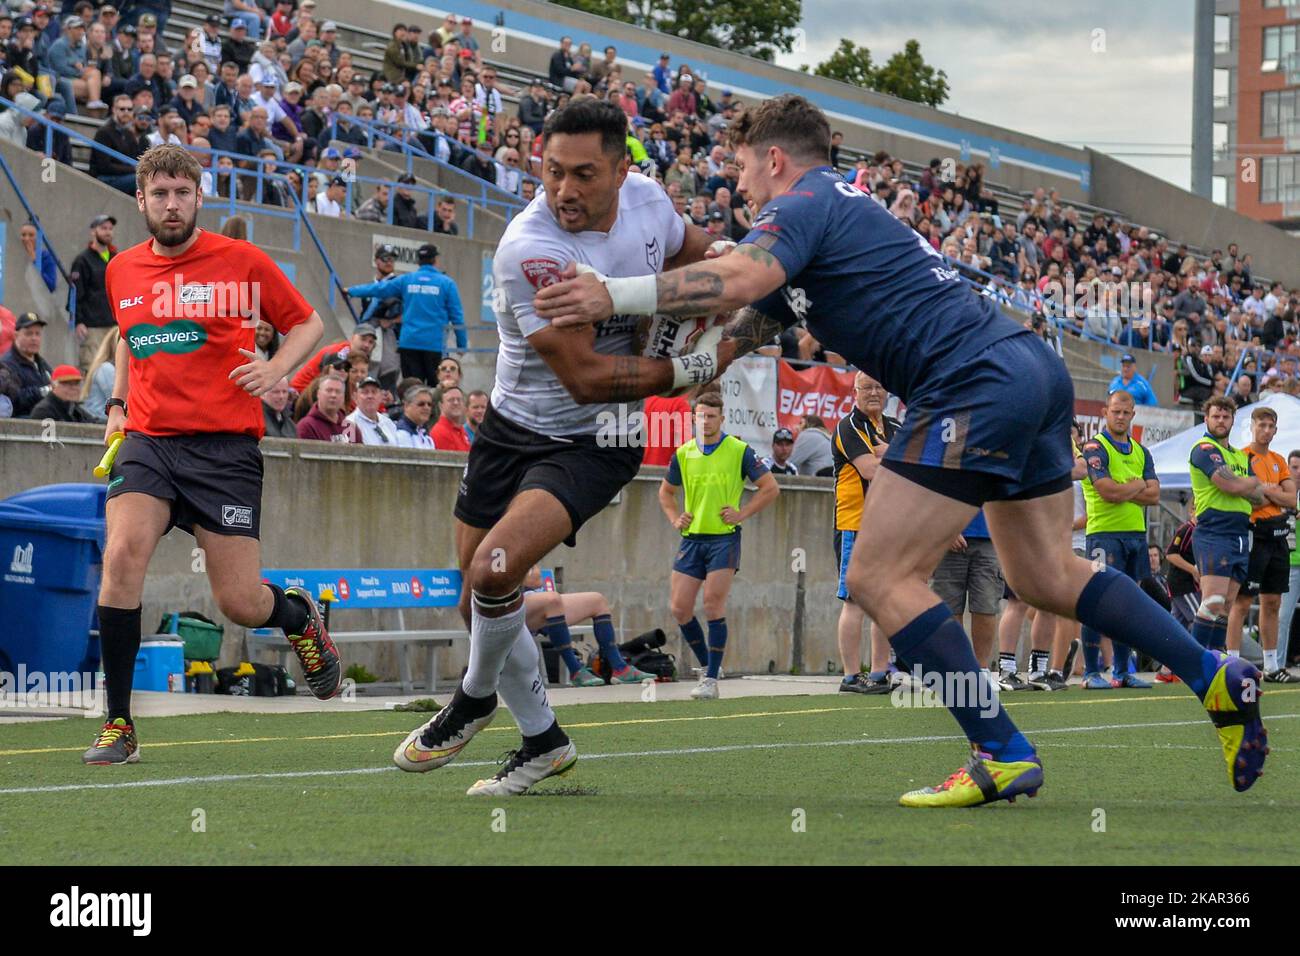 Quentin Laulu-Togaga'e (L) of Toronto Wolfpack in action during Super 8s Round 4 game between Toronto Wolfpack (Canada) vs Whitehaven RLFC (United Kingdom) at Allan A. Lamport Stadium in Toronto, Canada, on 2 September 2017. (Photo by Anatoliy Cherkasov/NurPhoto) Stock Photo